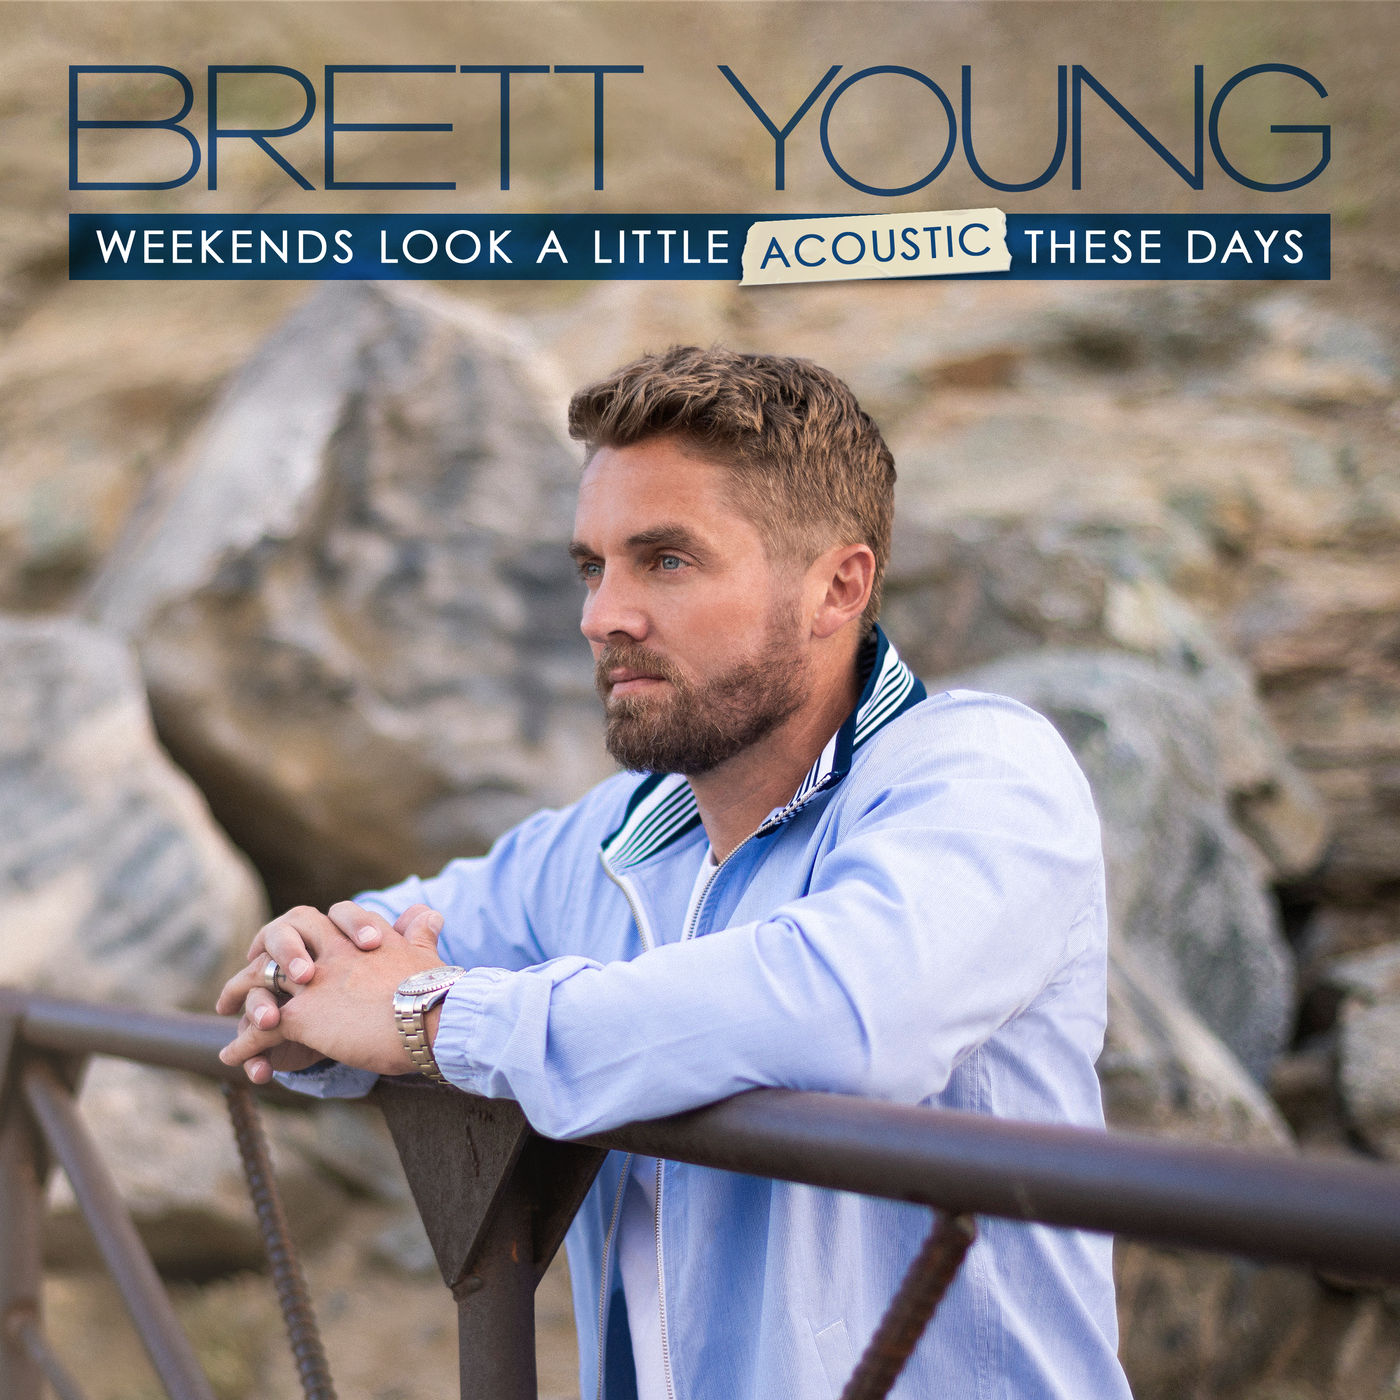 Brett Young – Weekends Look A Little Acoustic These Days (2021) [FLAC 24bit/96kHz]